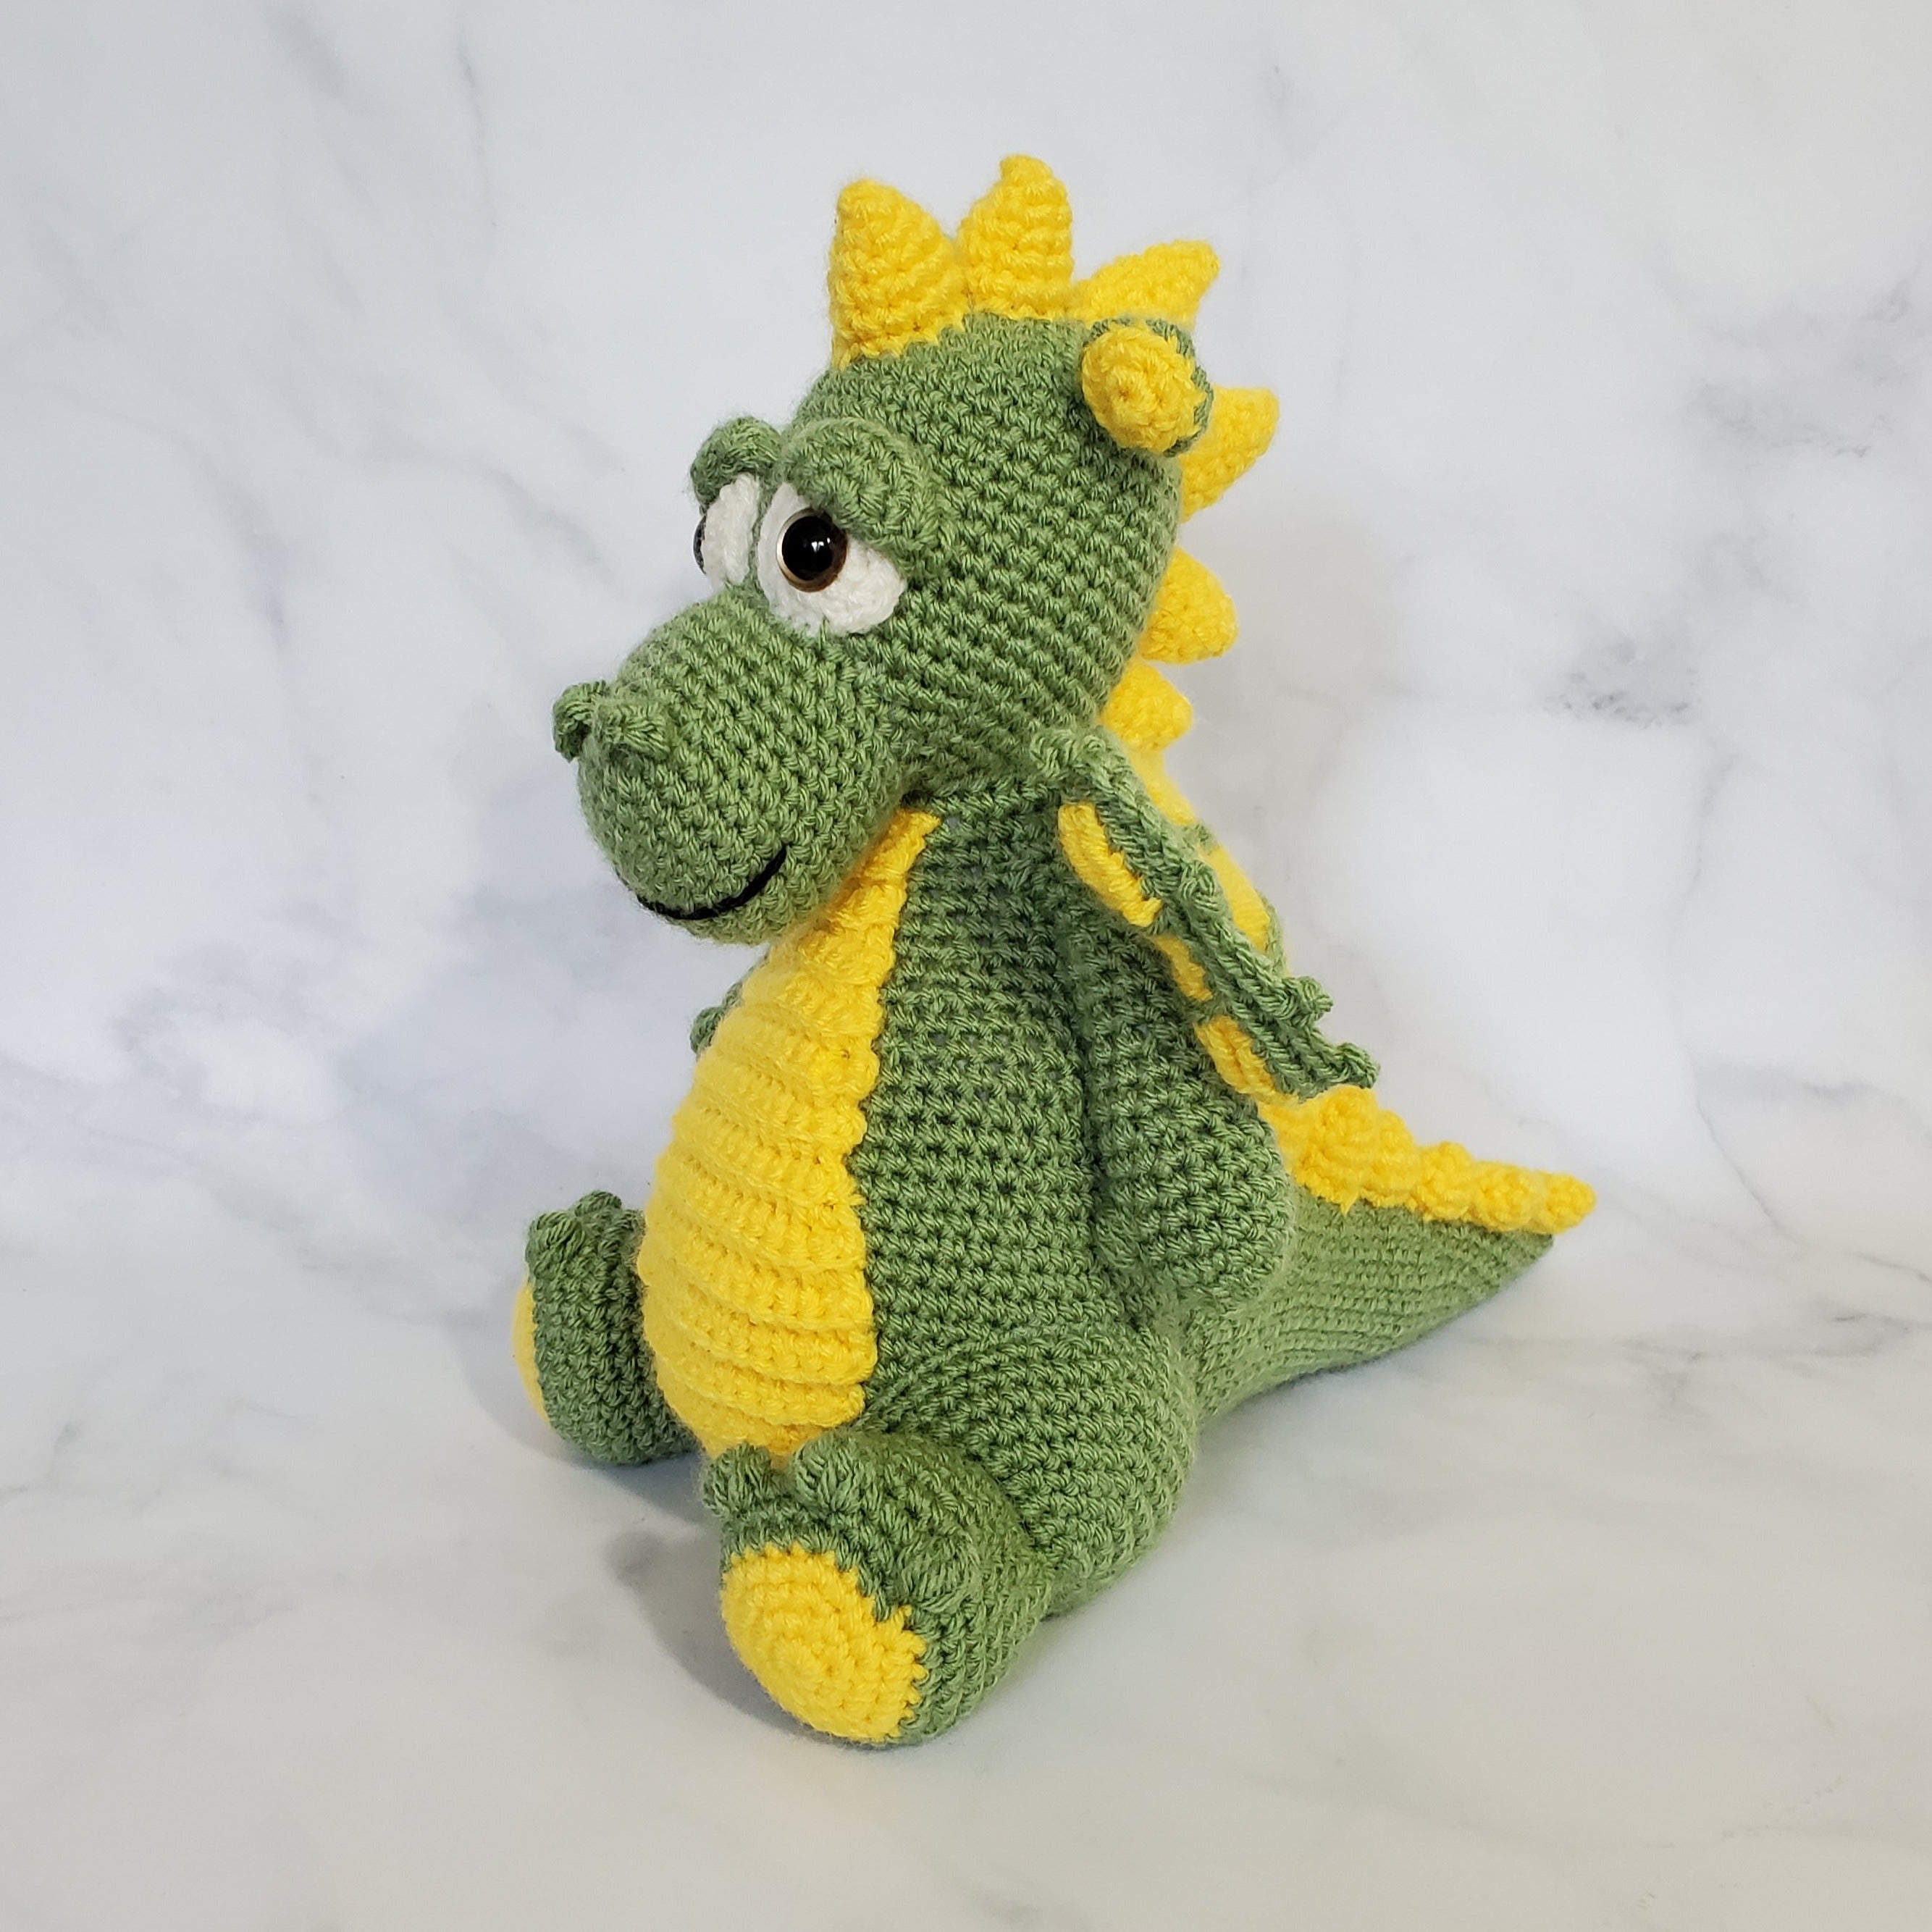 Dragon with Horn Plush Toy - 11 Inches - Green